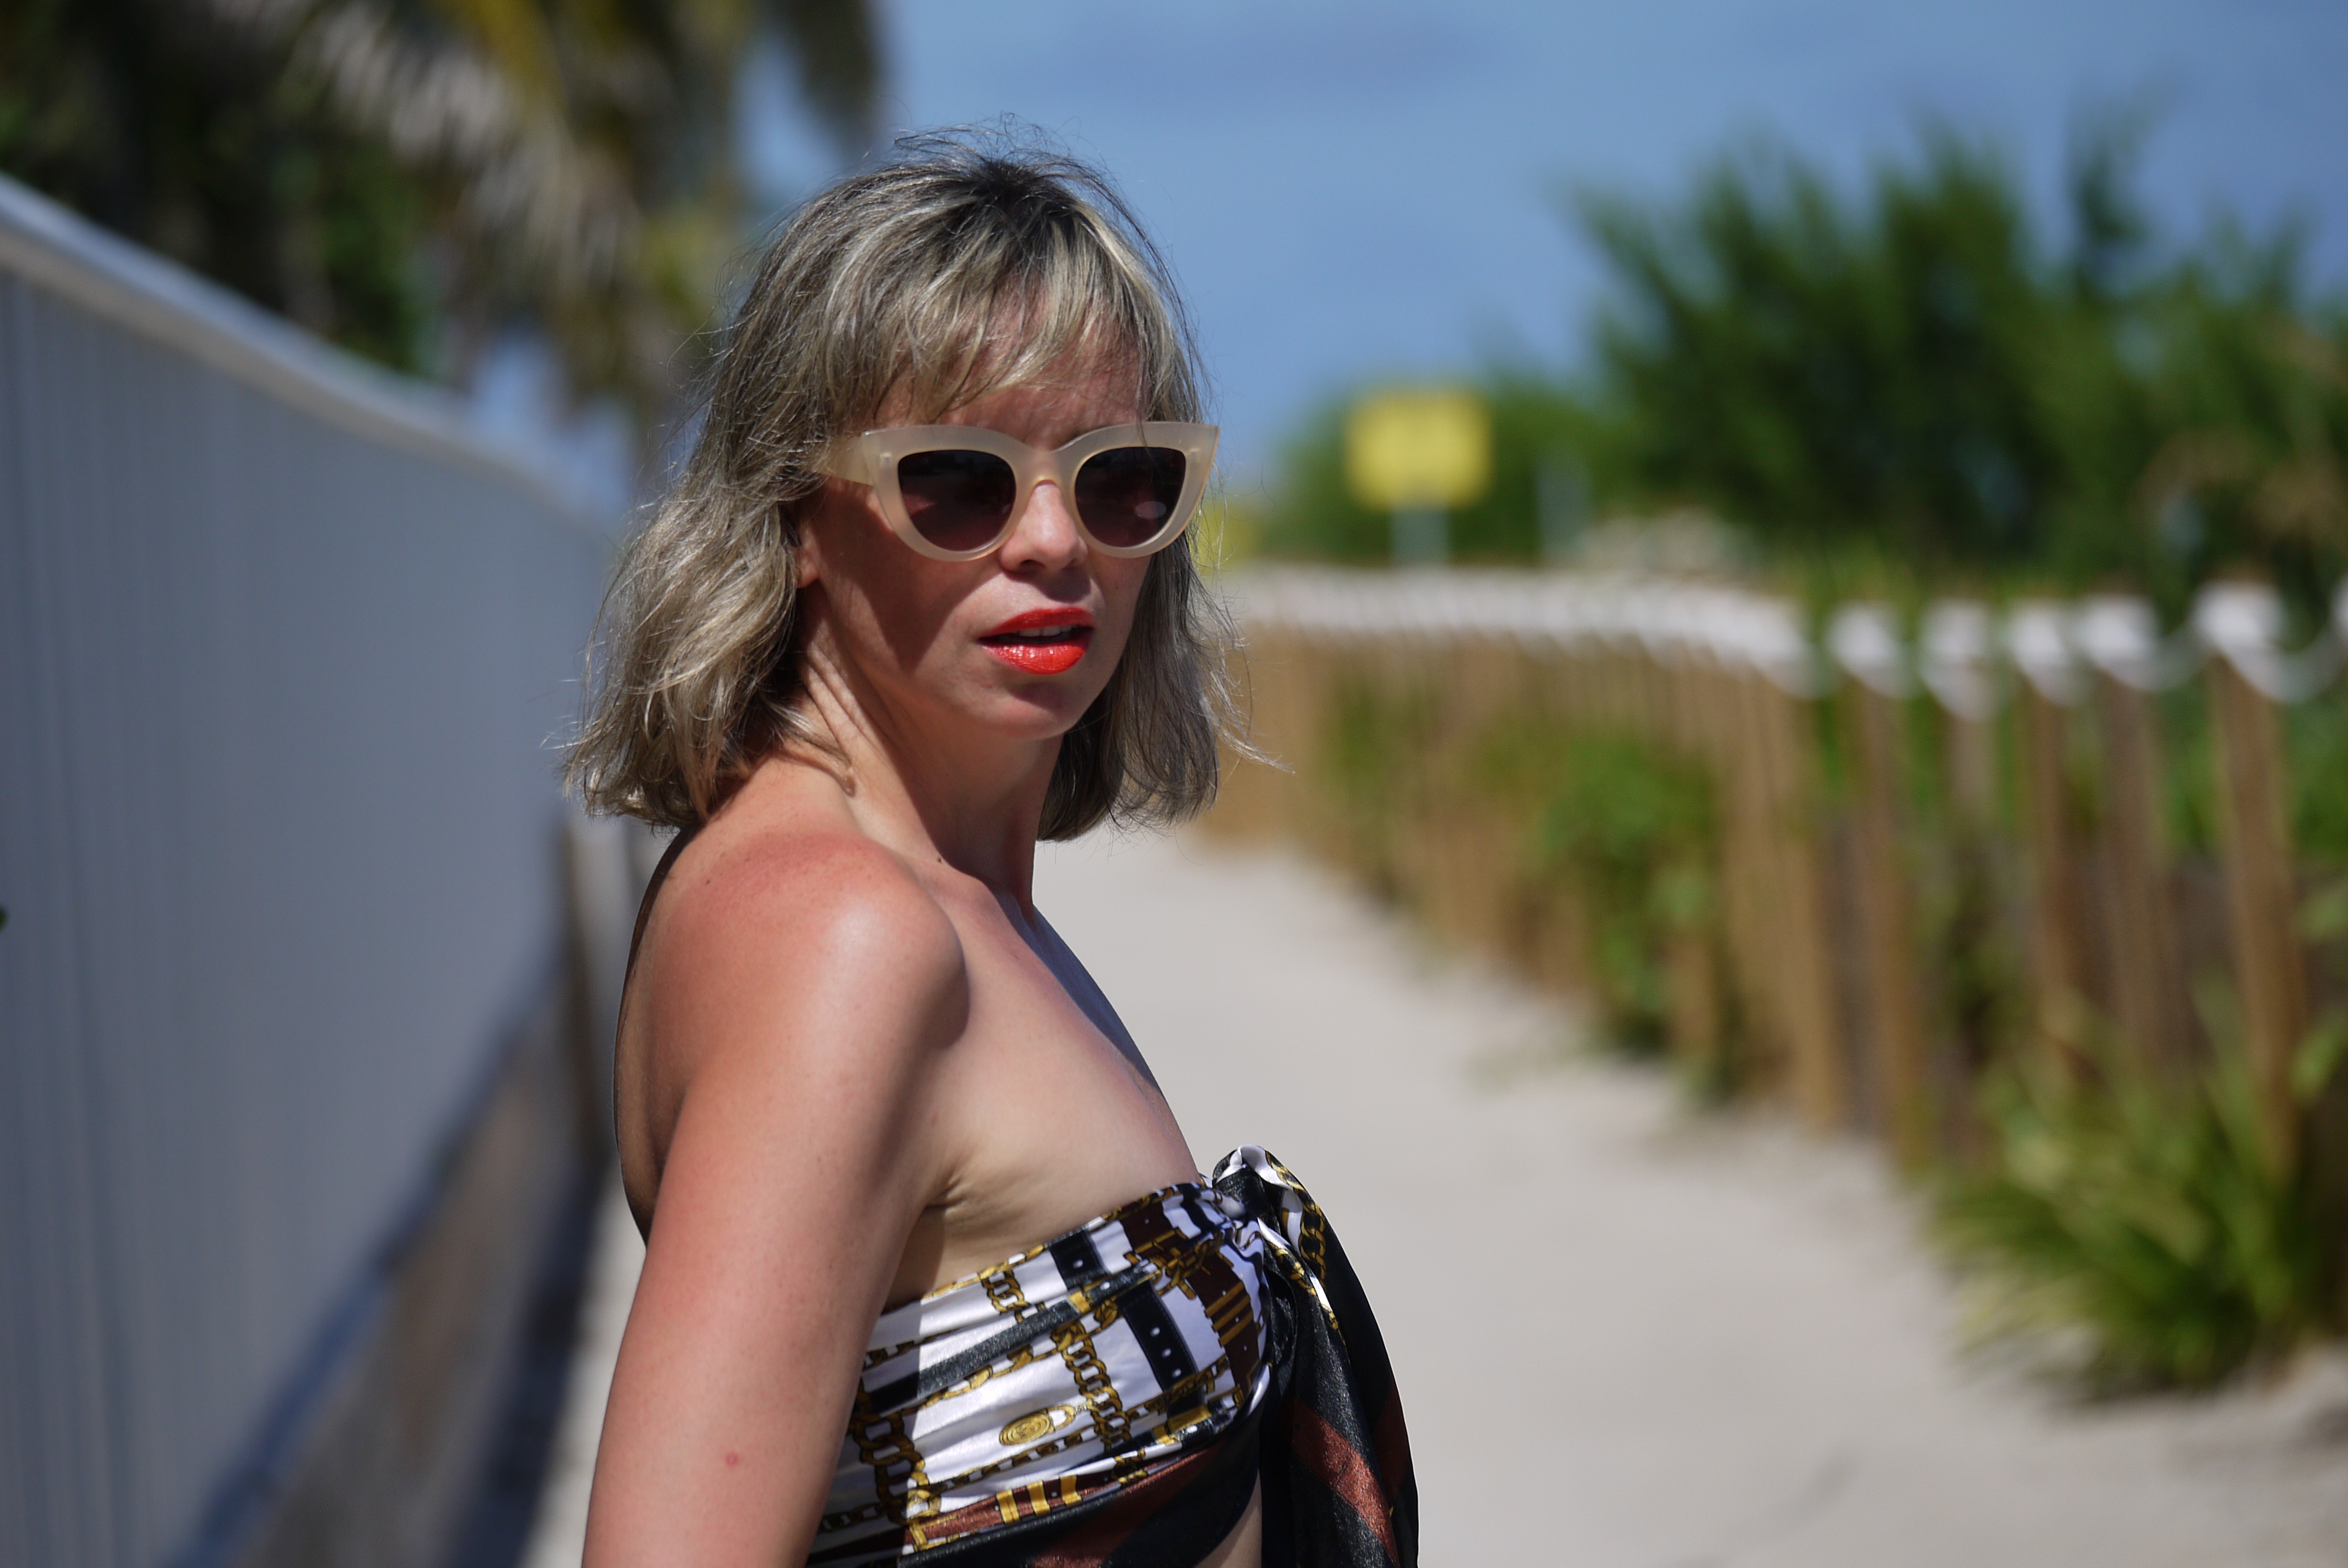 Alba Marina Otero fashion blogger from Mylovelypeople blog shares with you what to wear in a birthday party at the beach, she is wearing a high waist polka dots pants, a scarf as a top and a pairs of flat greek sandals